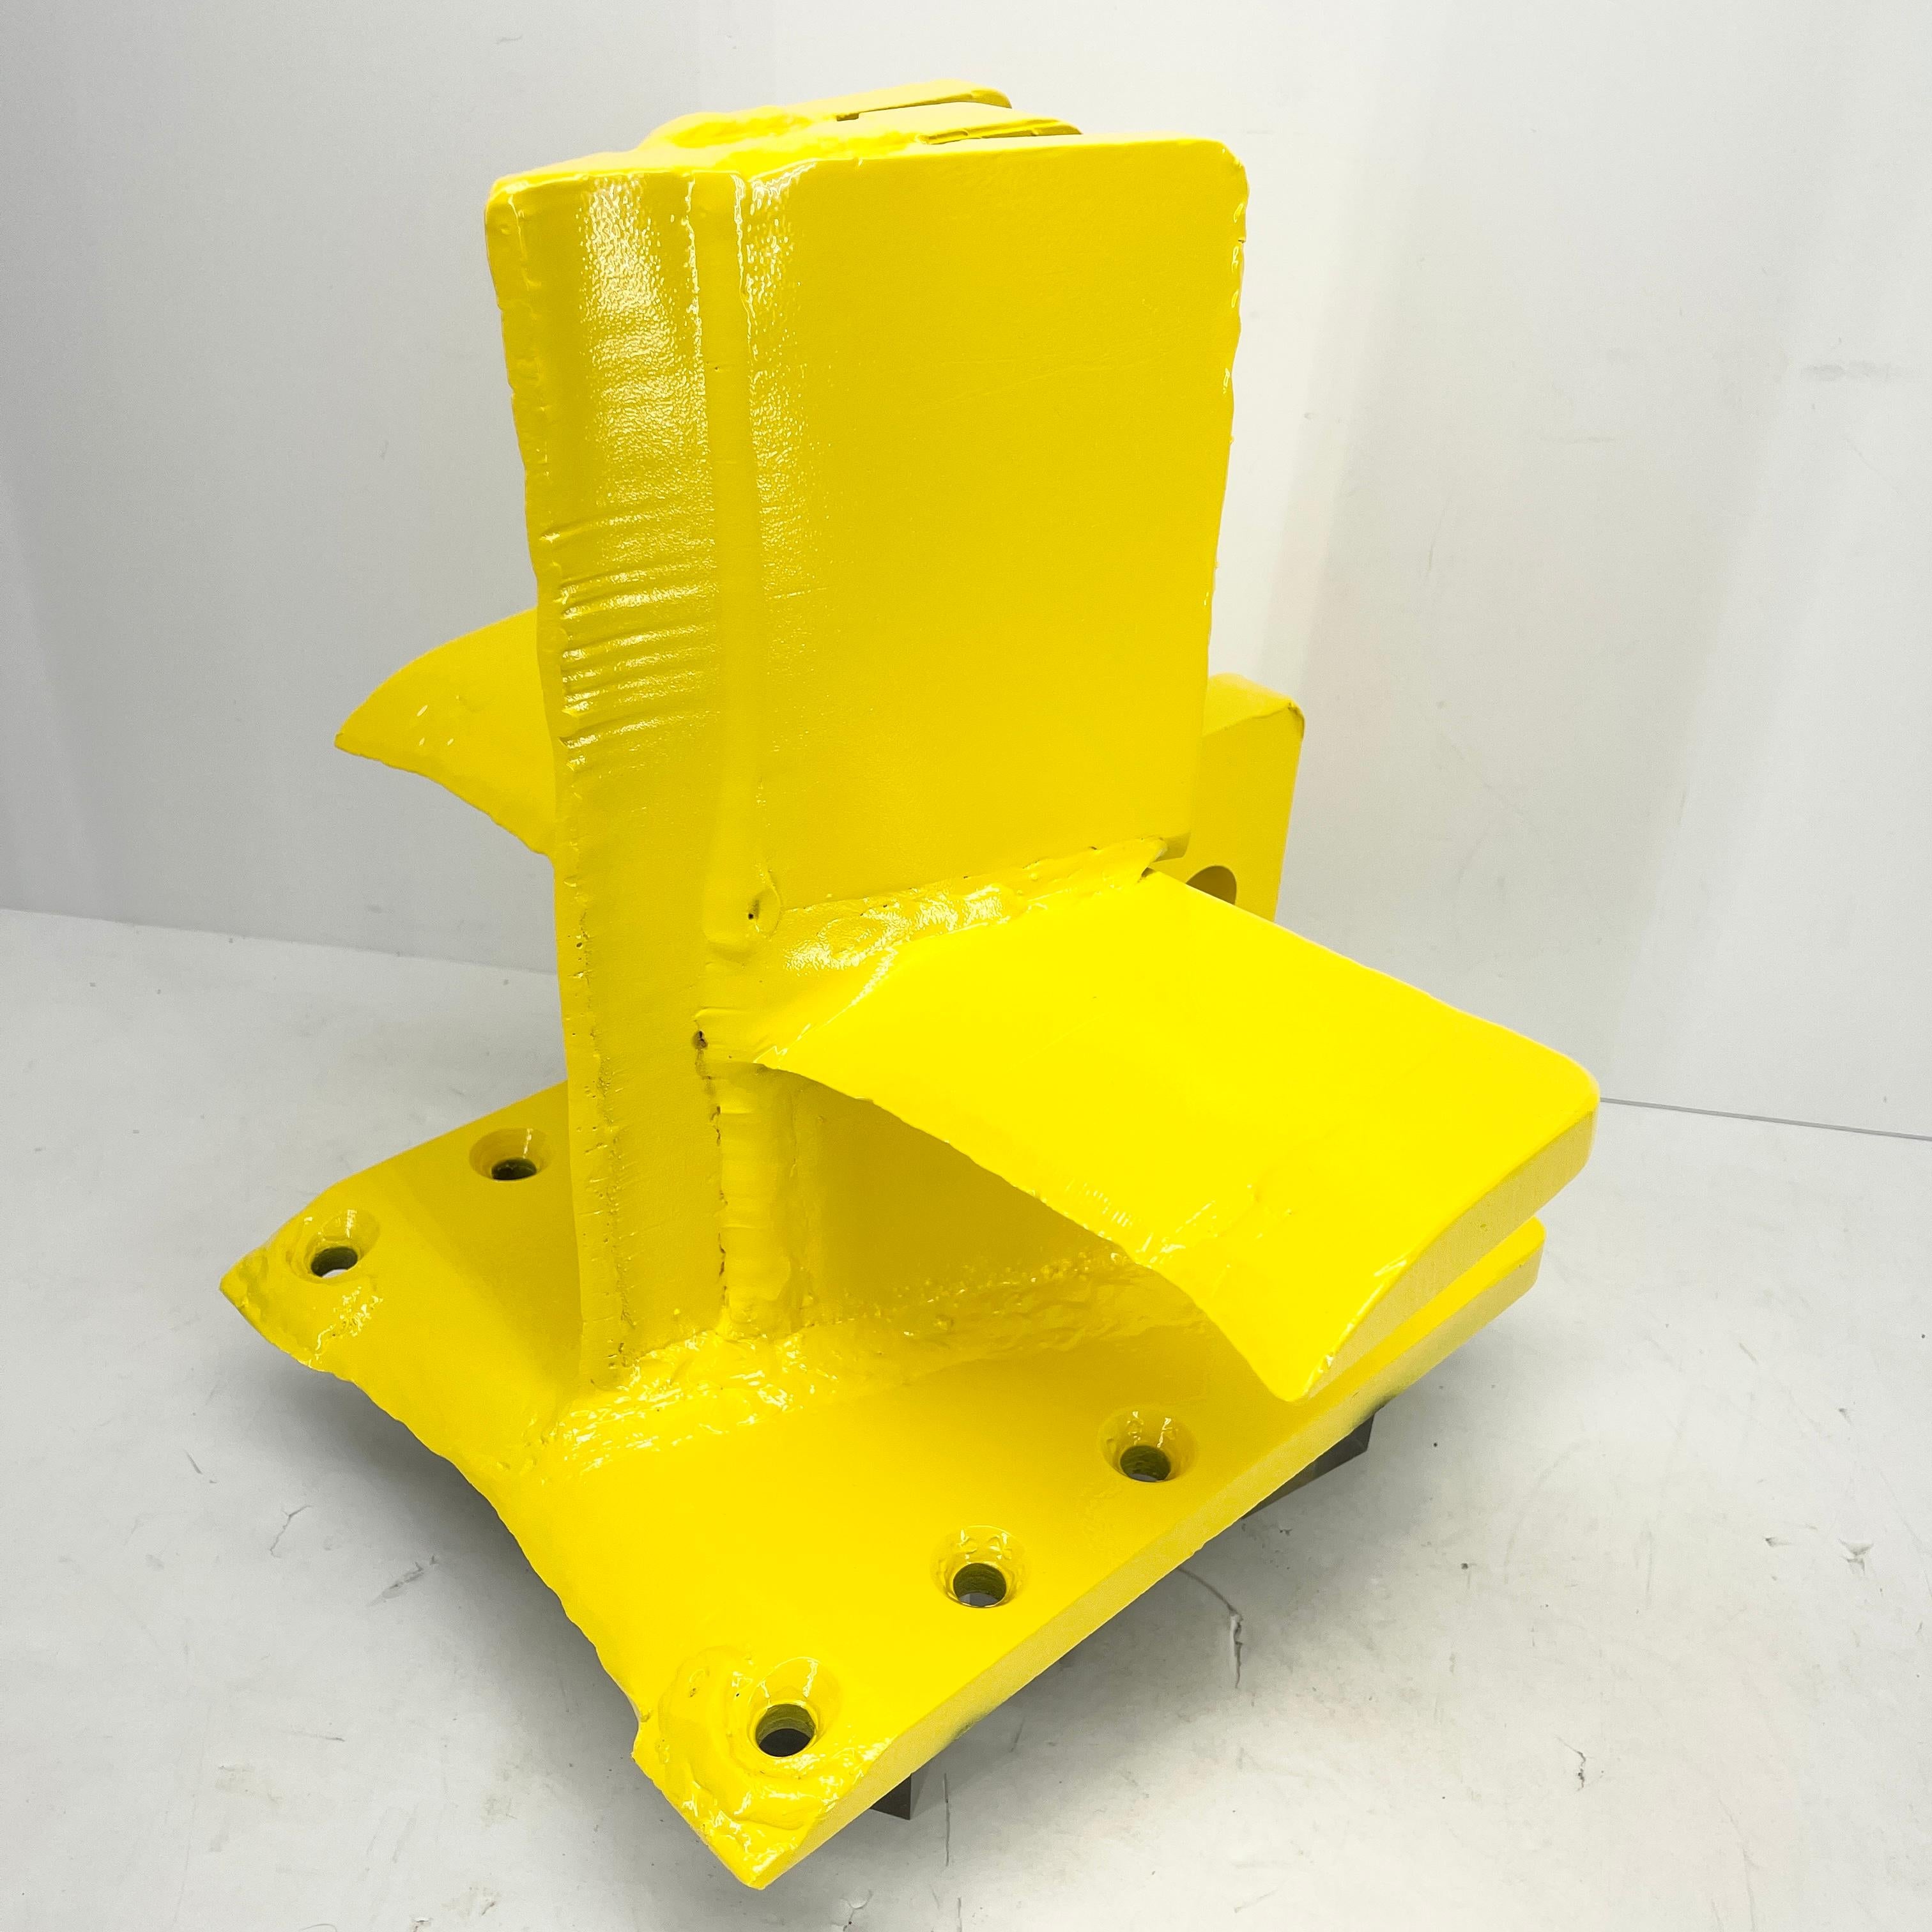 American Bright Sunshine Yellow Abstract Eagle Head Sculpture From a 3 Way Wood Splitter For Sale